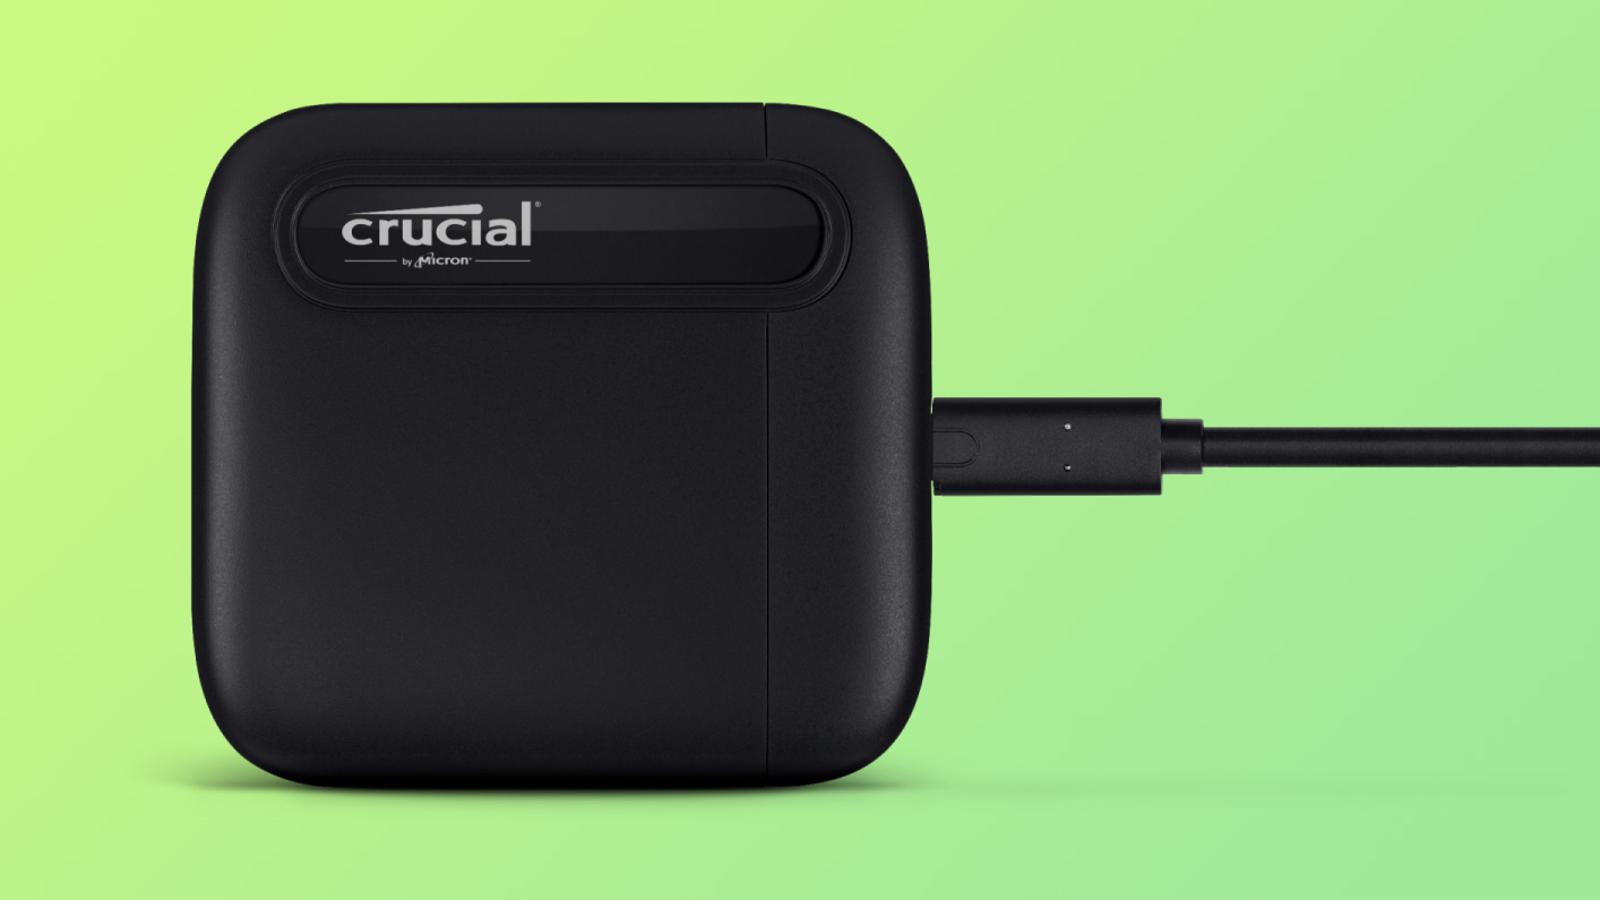 Crucial X8 Portable SSD Review: Fast, Value-Priced Storage